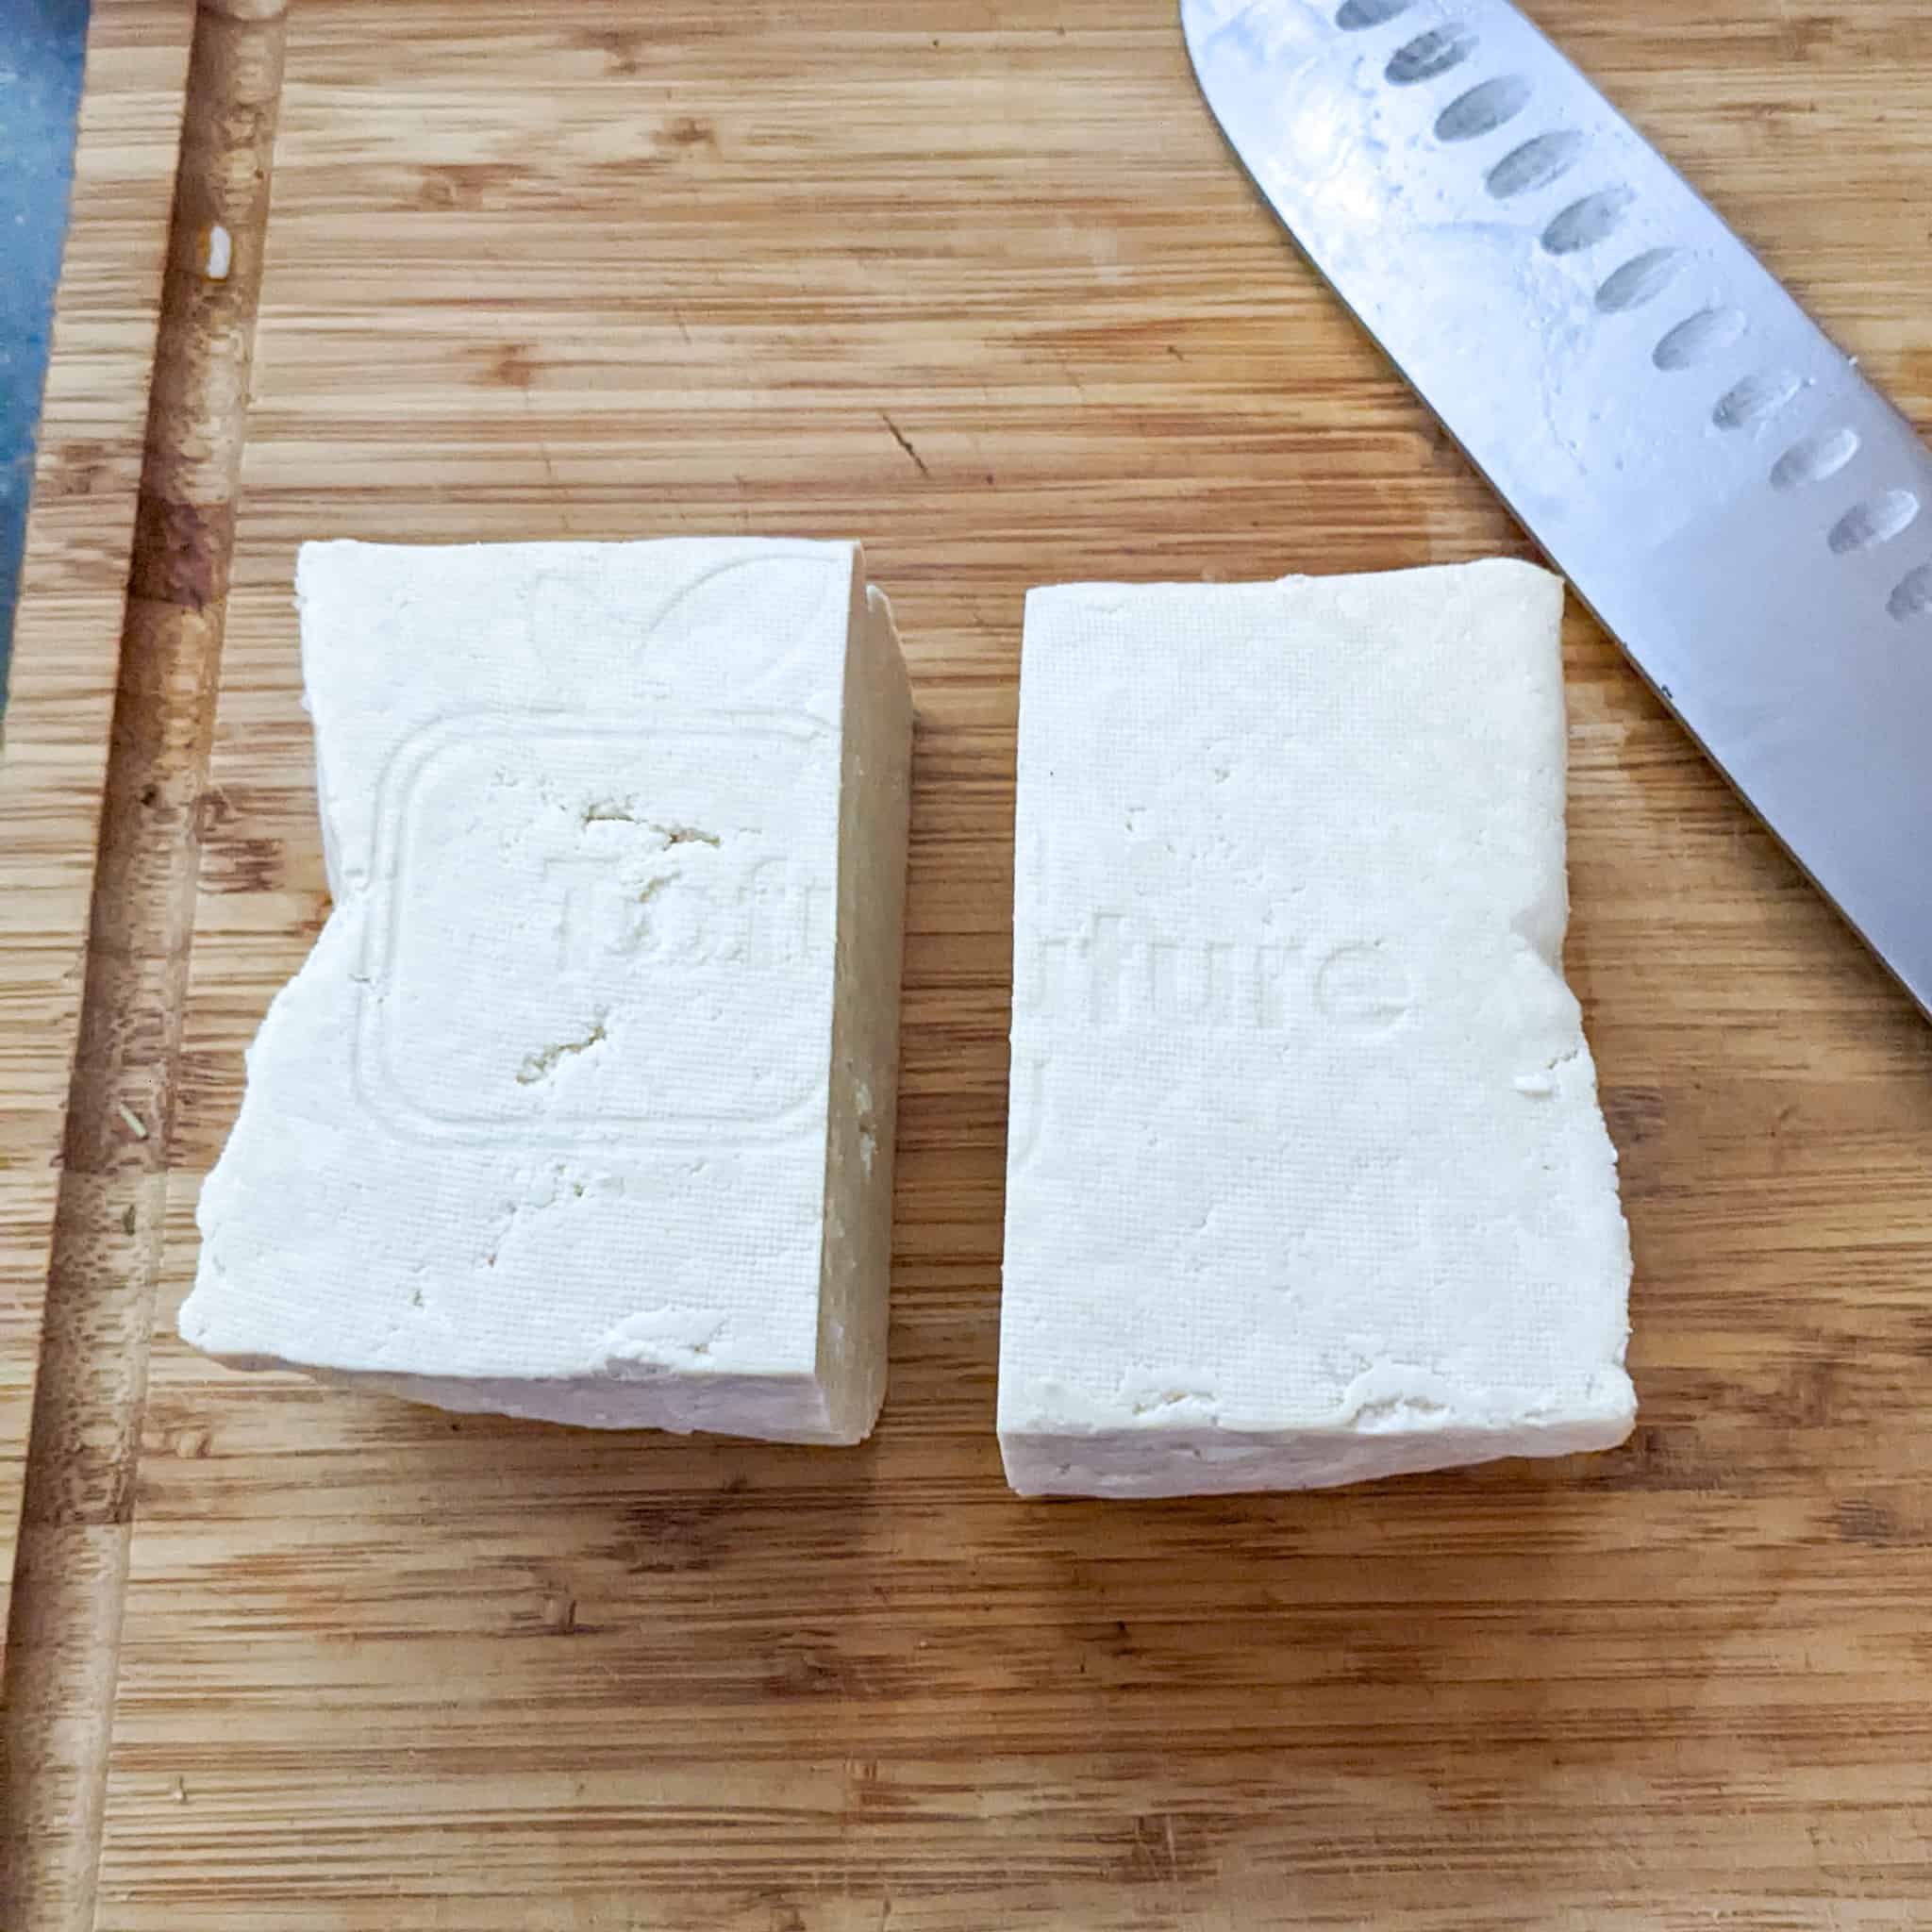 pressed tofu on a wooden cutting board cut into half displayed with a santoku knife